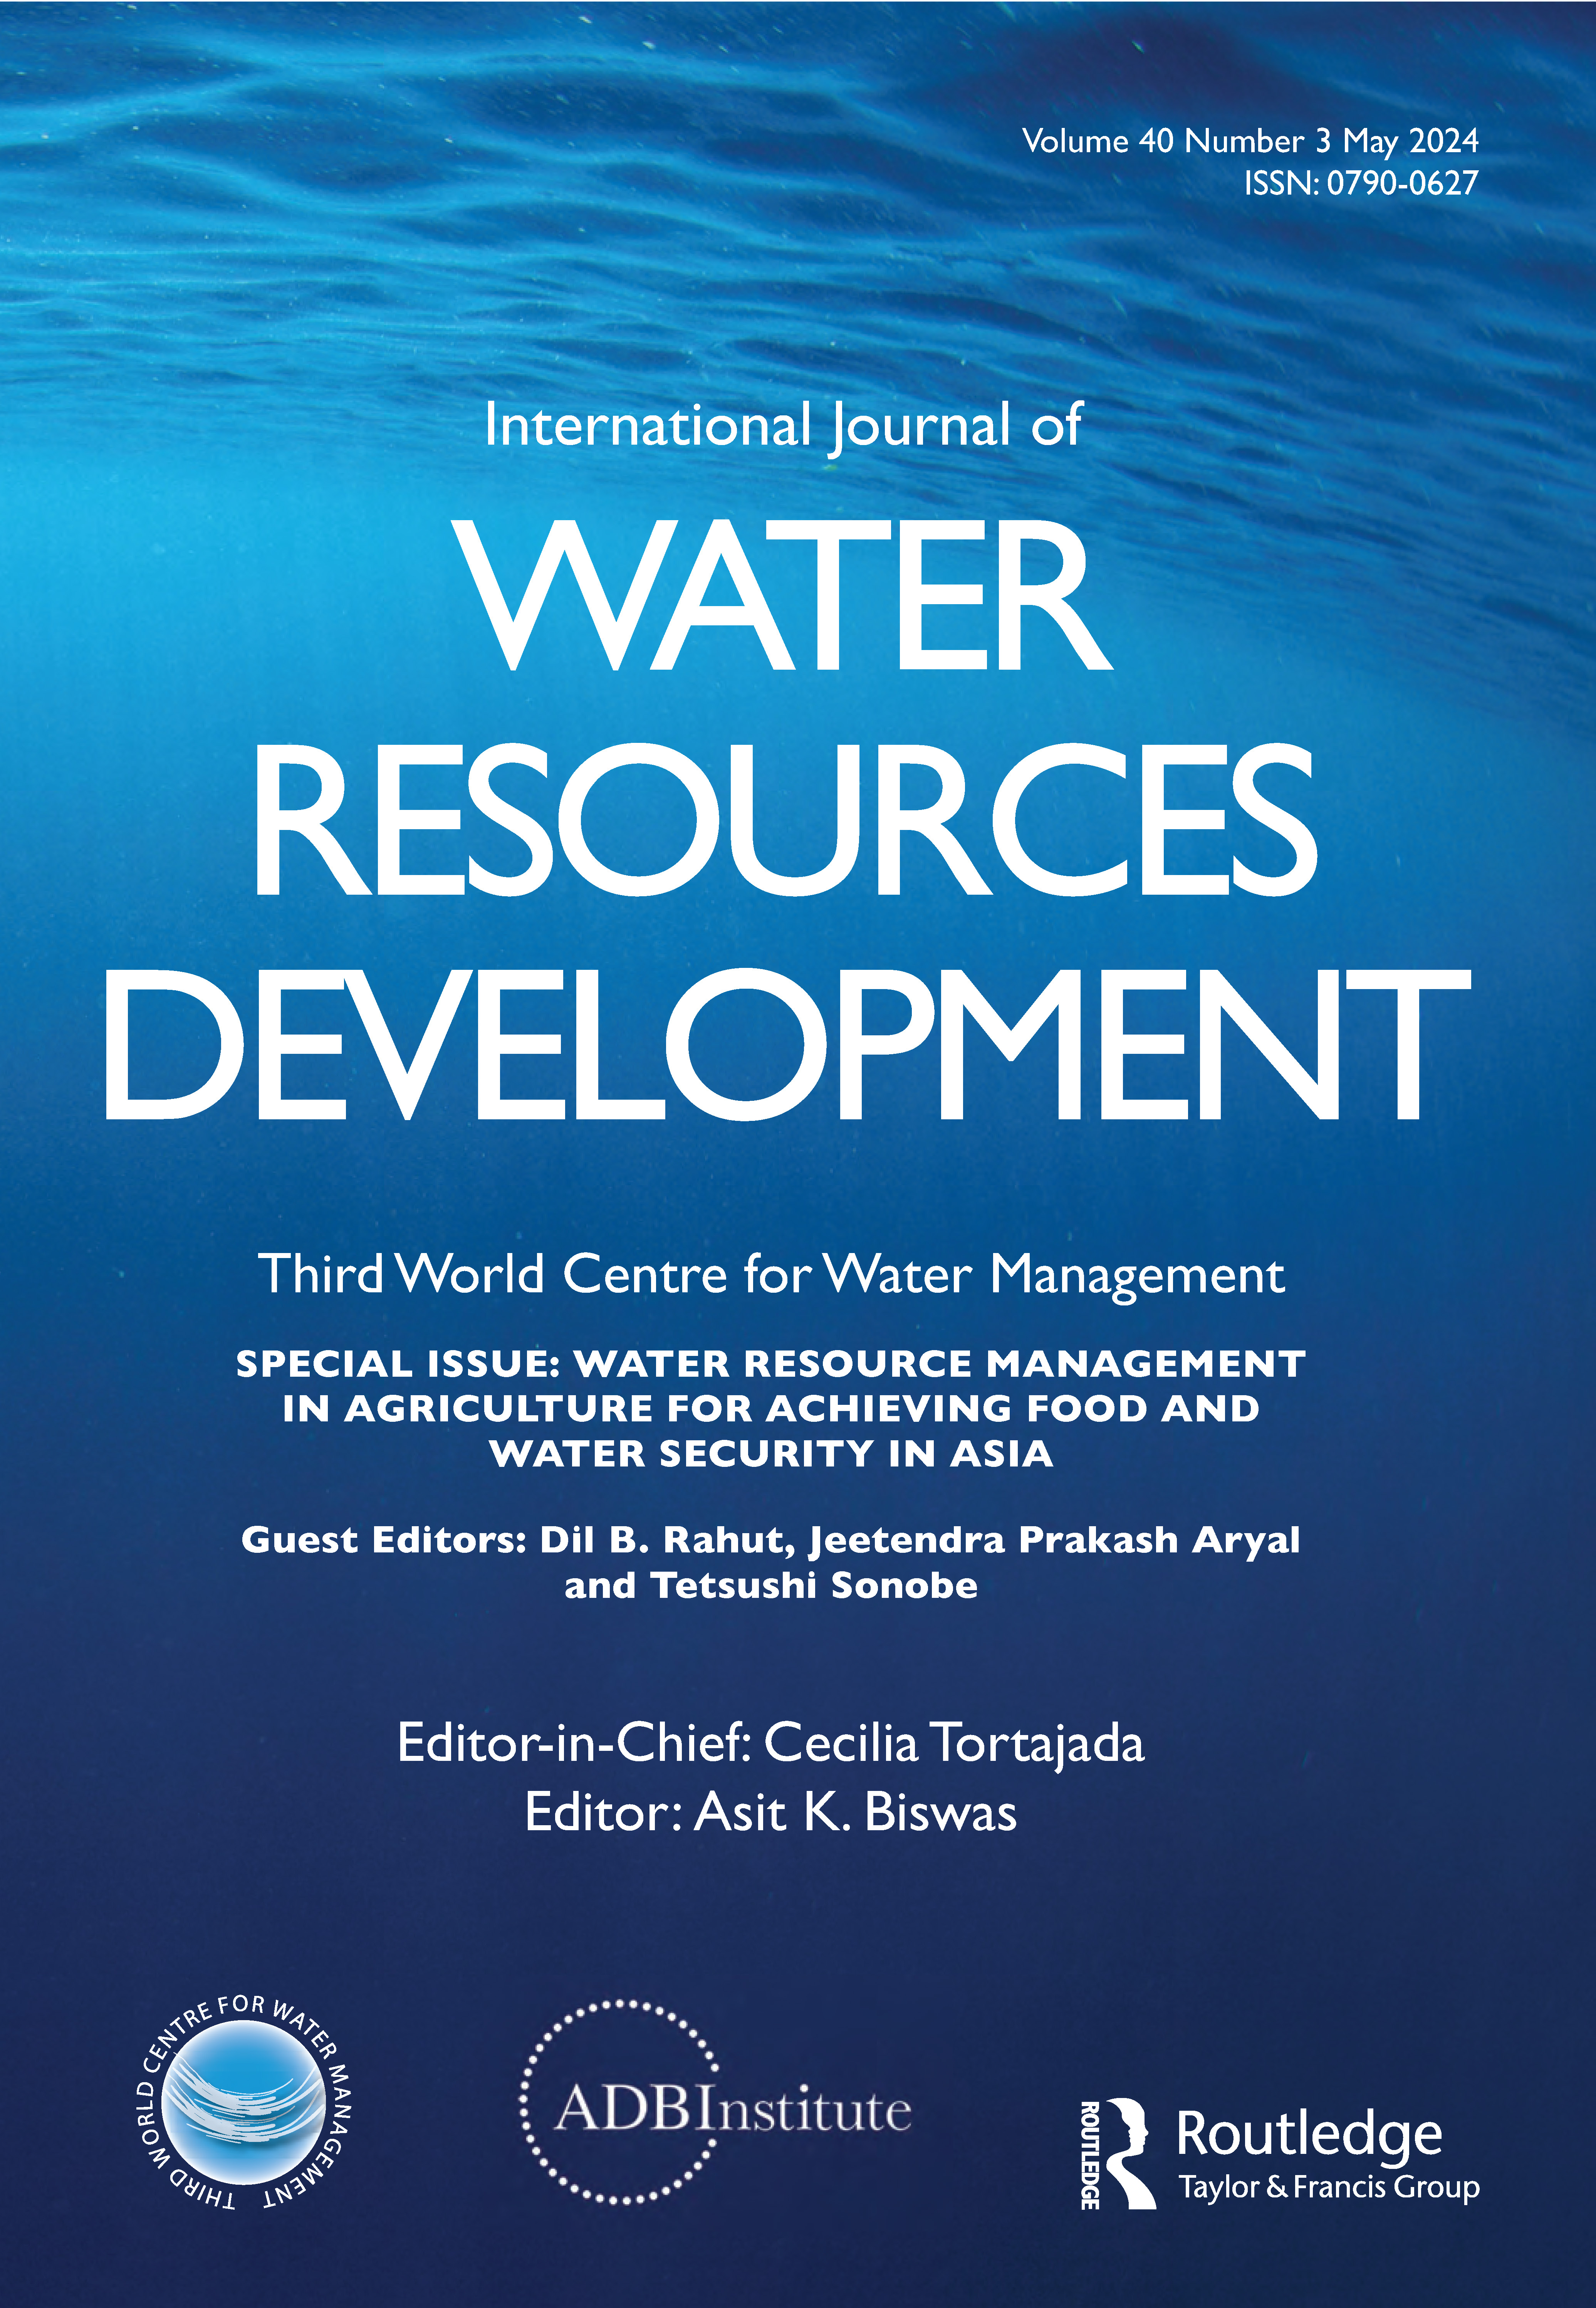 Special Issue on "Water resource management in agriculture for achieving food and water security under climate change in Asia" of our Internatio...